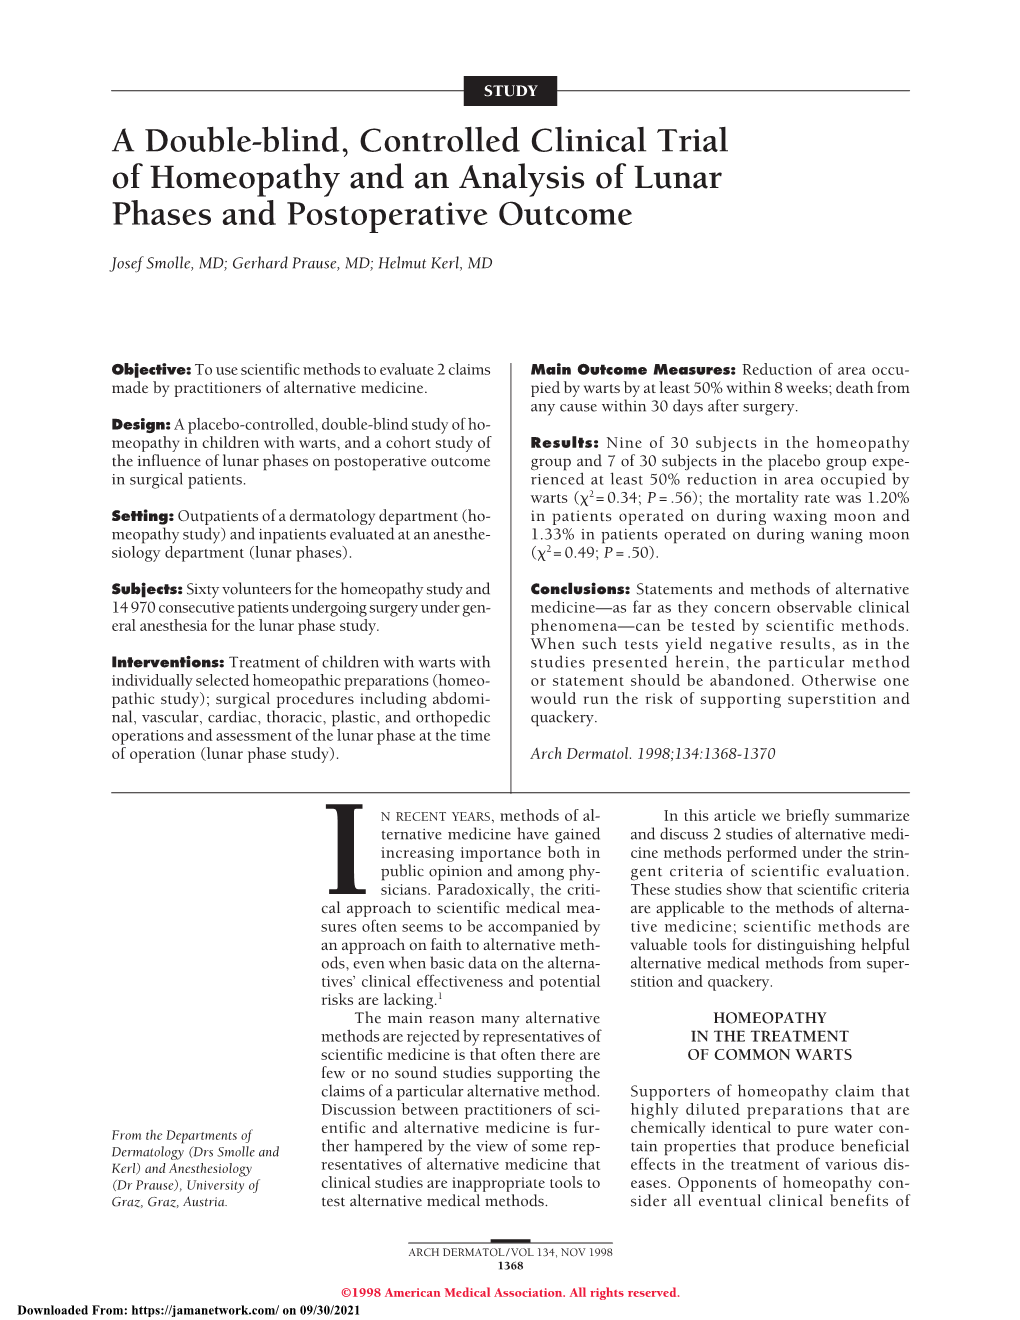 A Double-Blind, Controlled Clinical Trial of Homeopathy and an Analysis of Lunar Phases and Postoperative Outcome